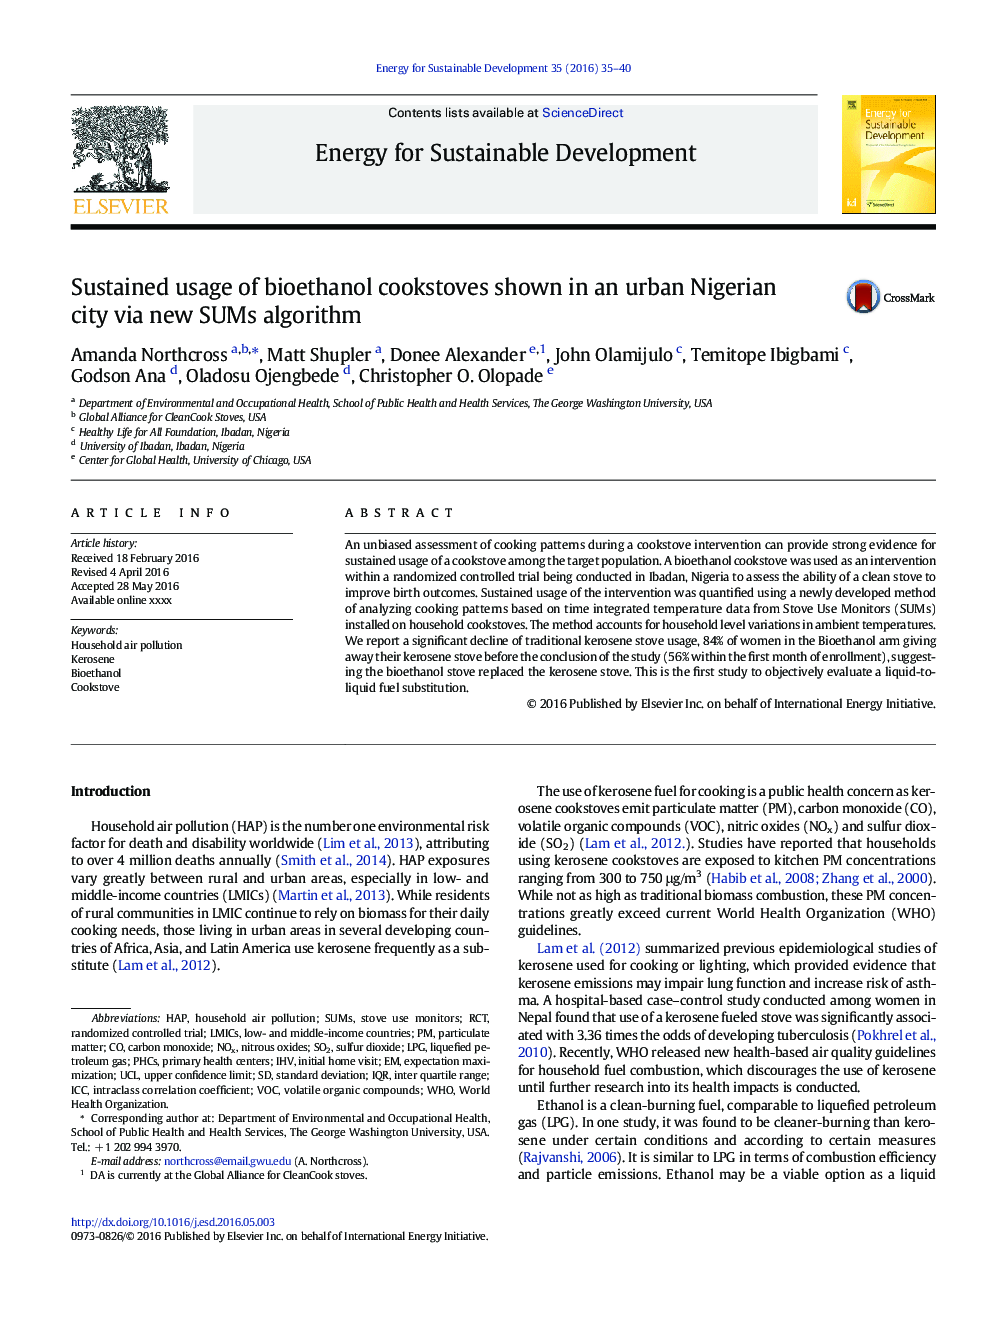 Sustained usage of bioethanol cookstoves shown in an urban Nigerian city via new SUMs algorithm